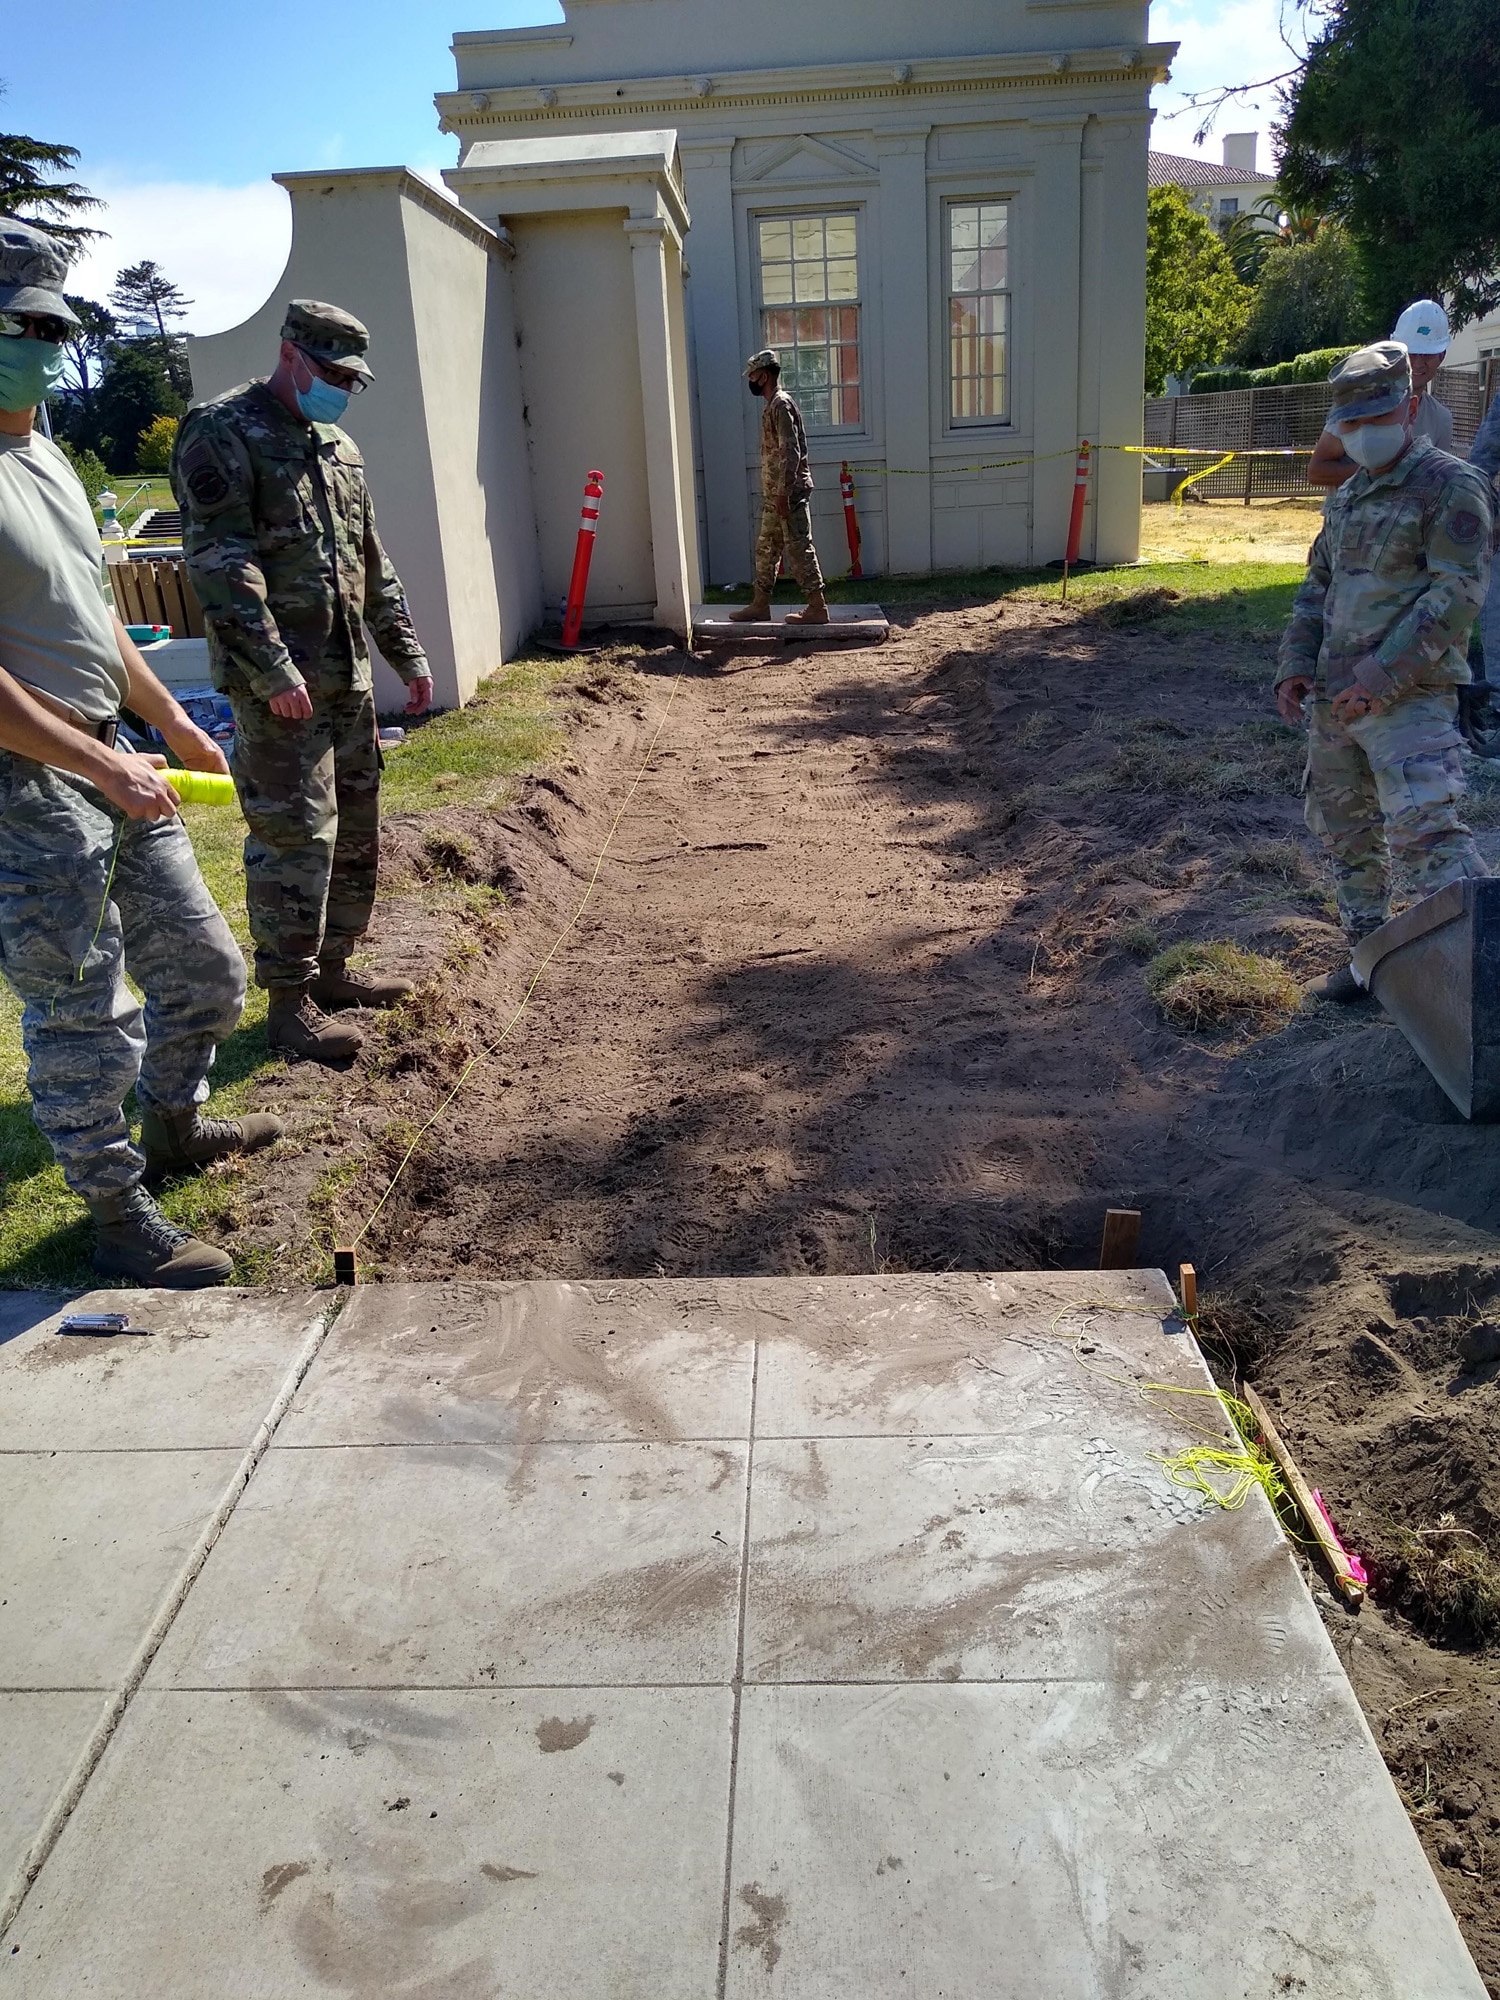 Members of the 349th Civil Engineer Squadron, Travis Air Force Base, California,  conducted an annual tour at the Naval Support Activity Monterey, a military university in Monterey, California, July 13-27, 2020. In this photo, Airmen Engineers improve access to the pump house by constructing a new 20’ by 70’ road and installing entry doors.